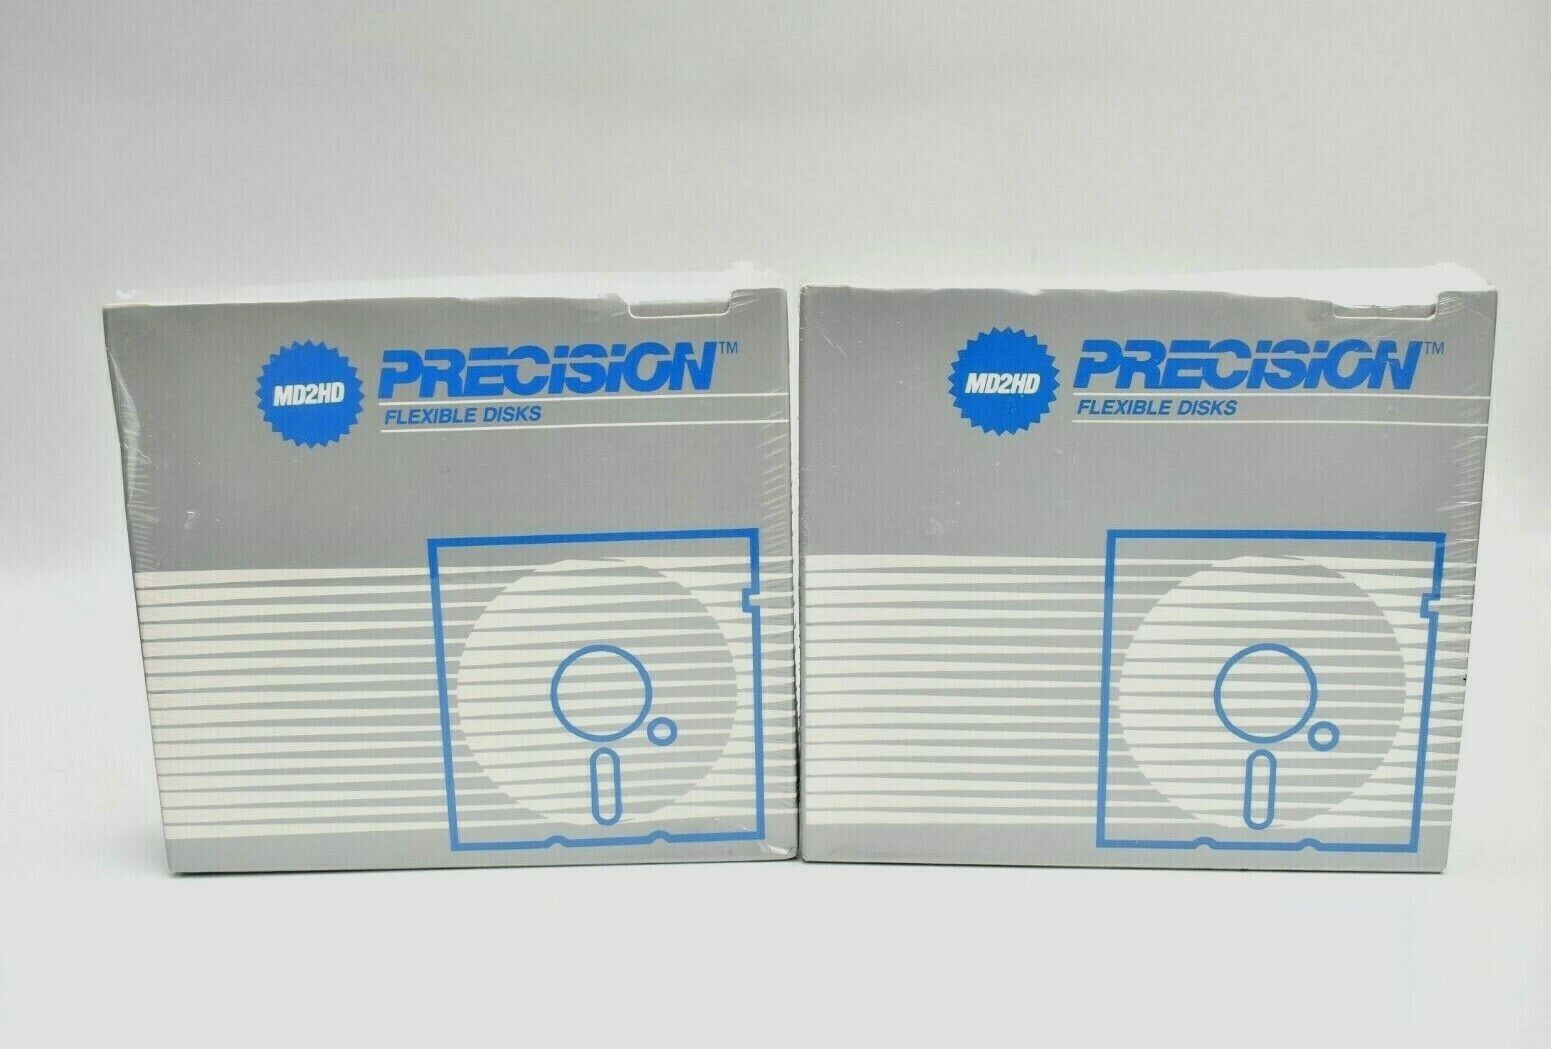 Lot of 2 New Sealed Precision Flexible Disks MD2HD (20 Disks Total)